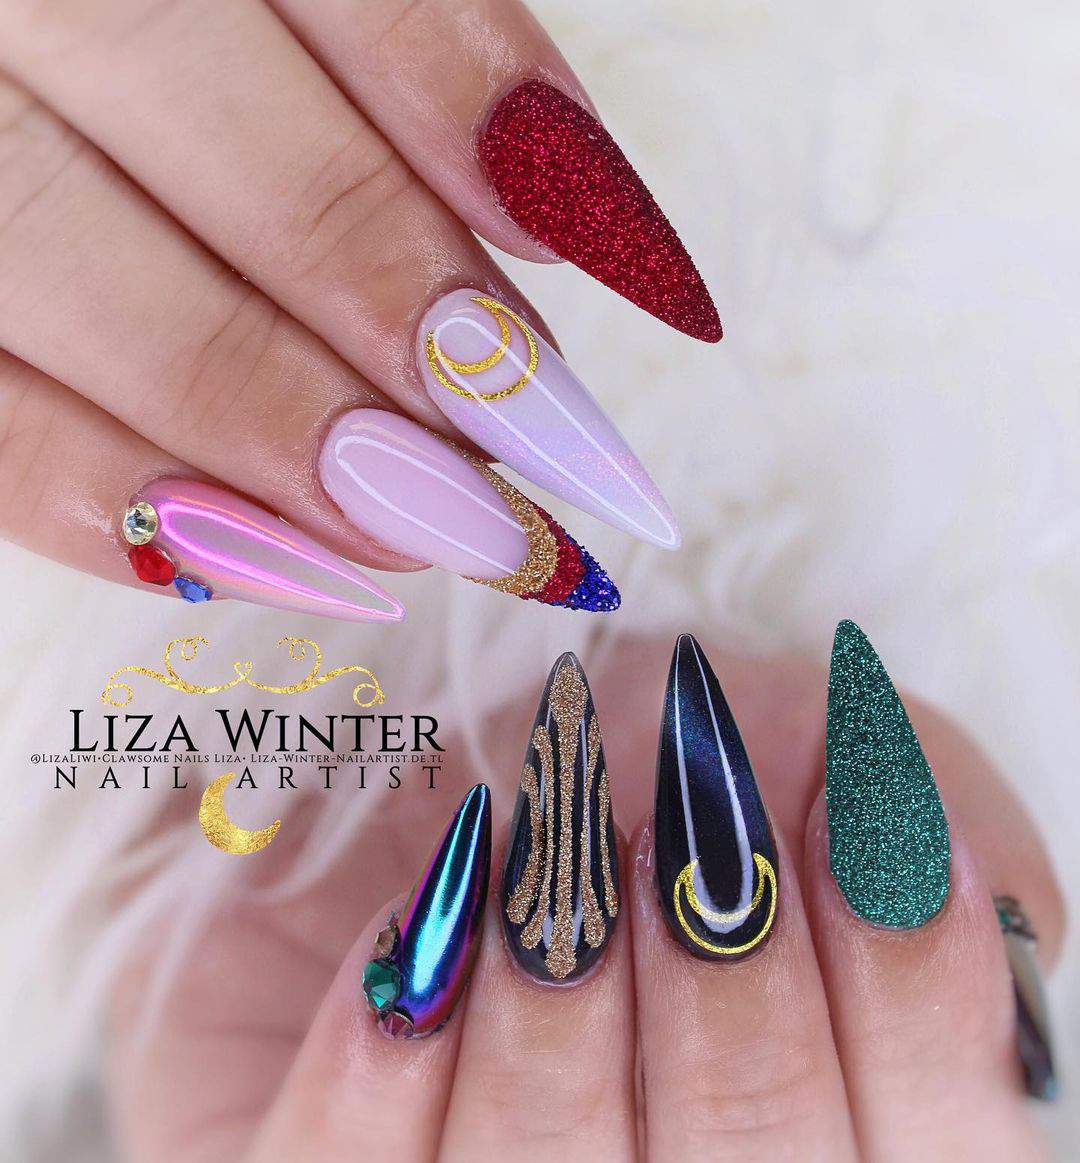 20 Cute Fall Nail Designs To Try In 2021 images 20